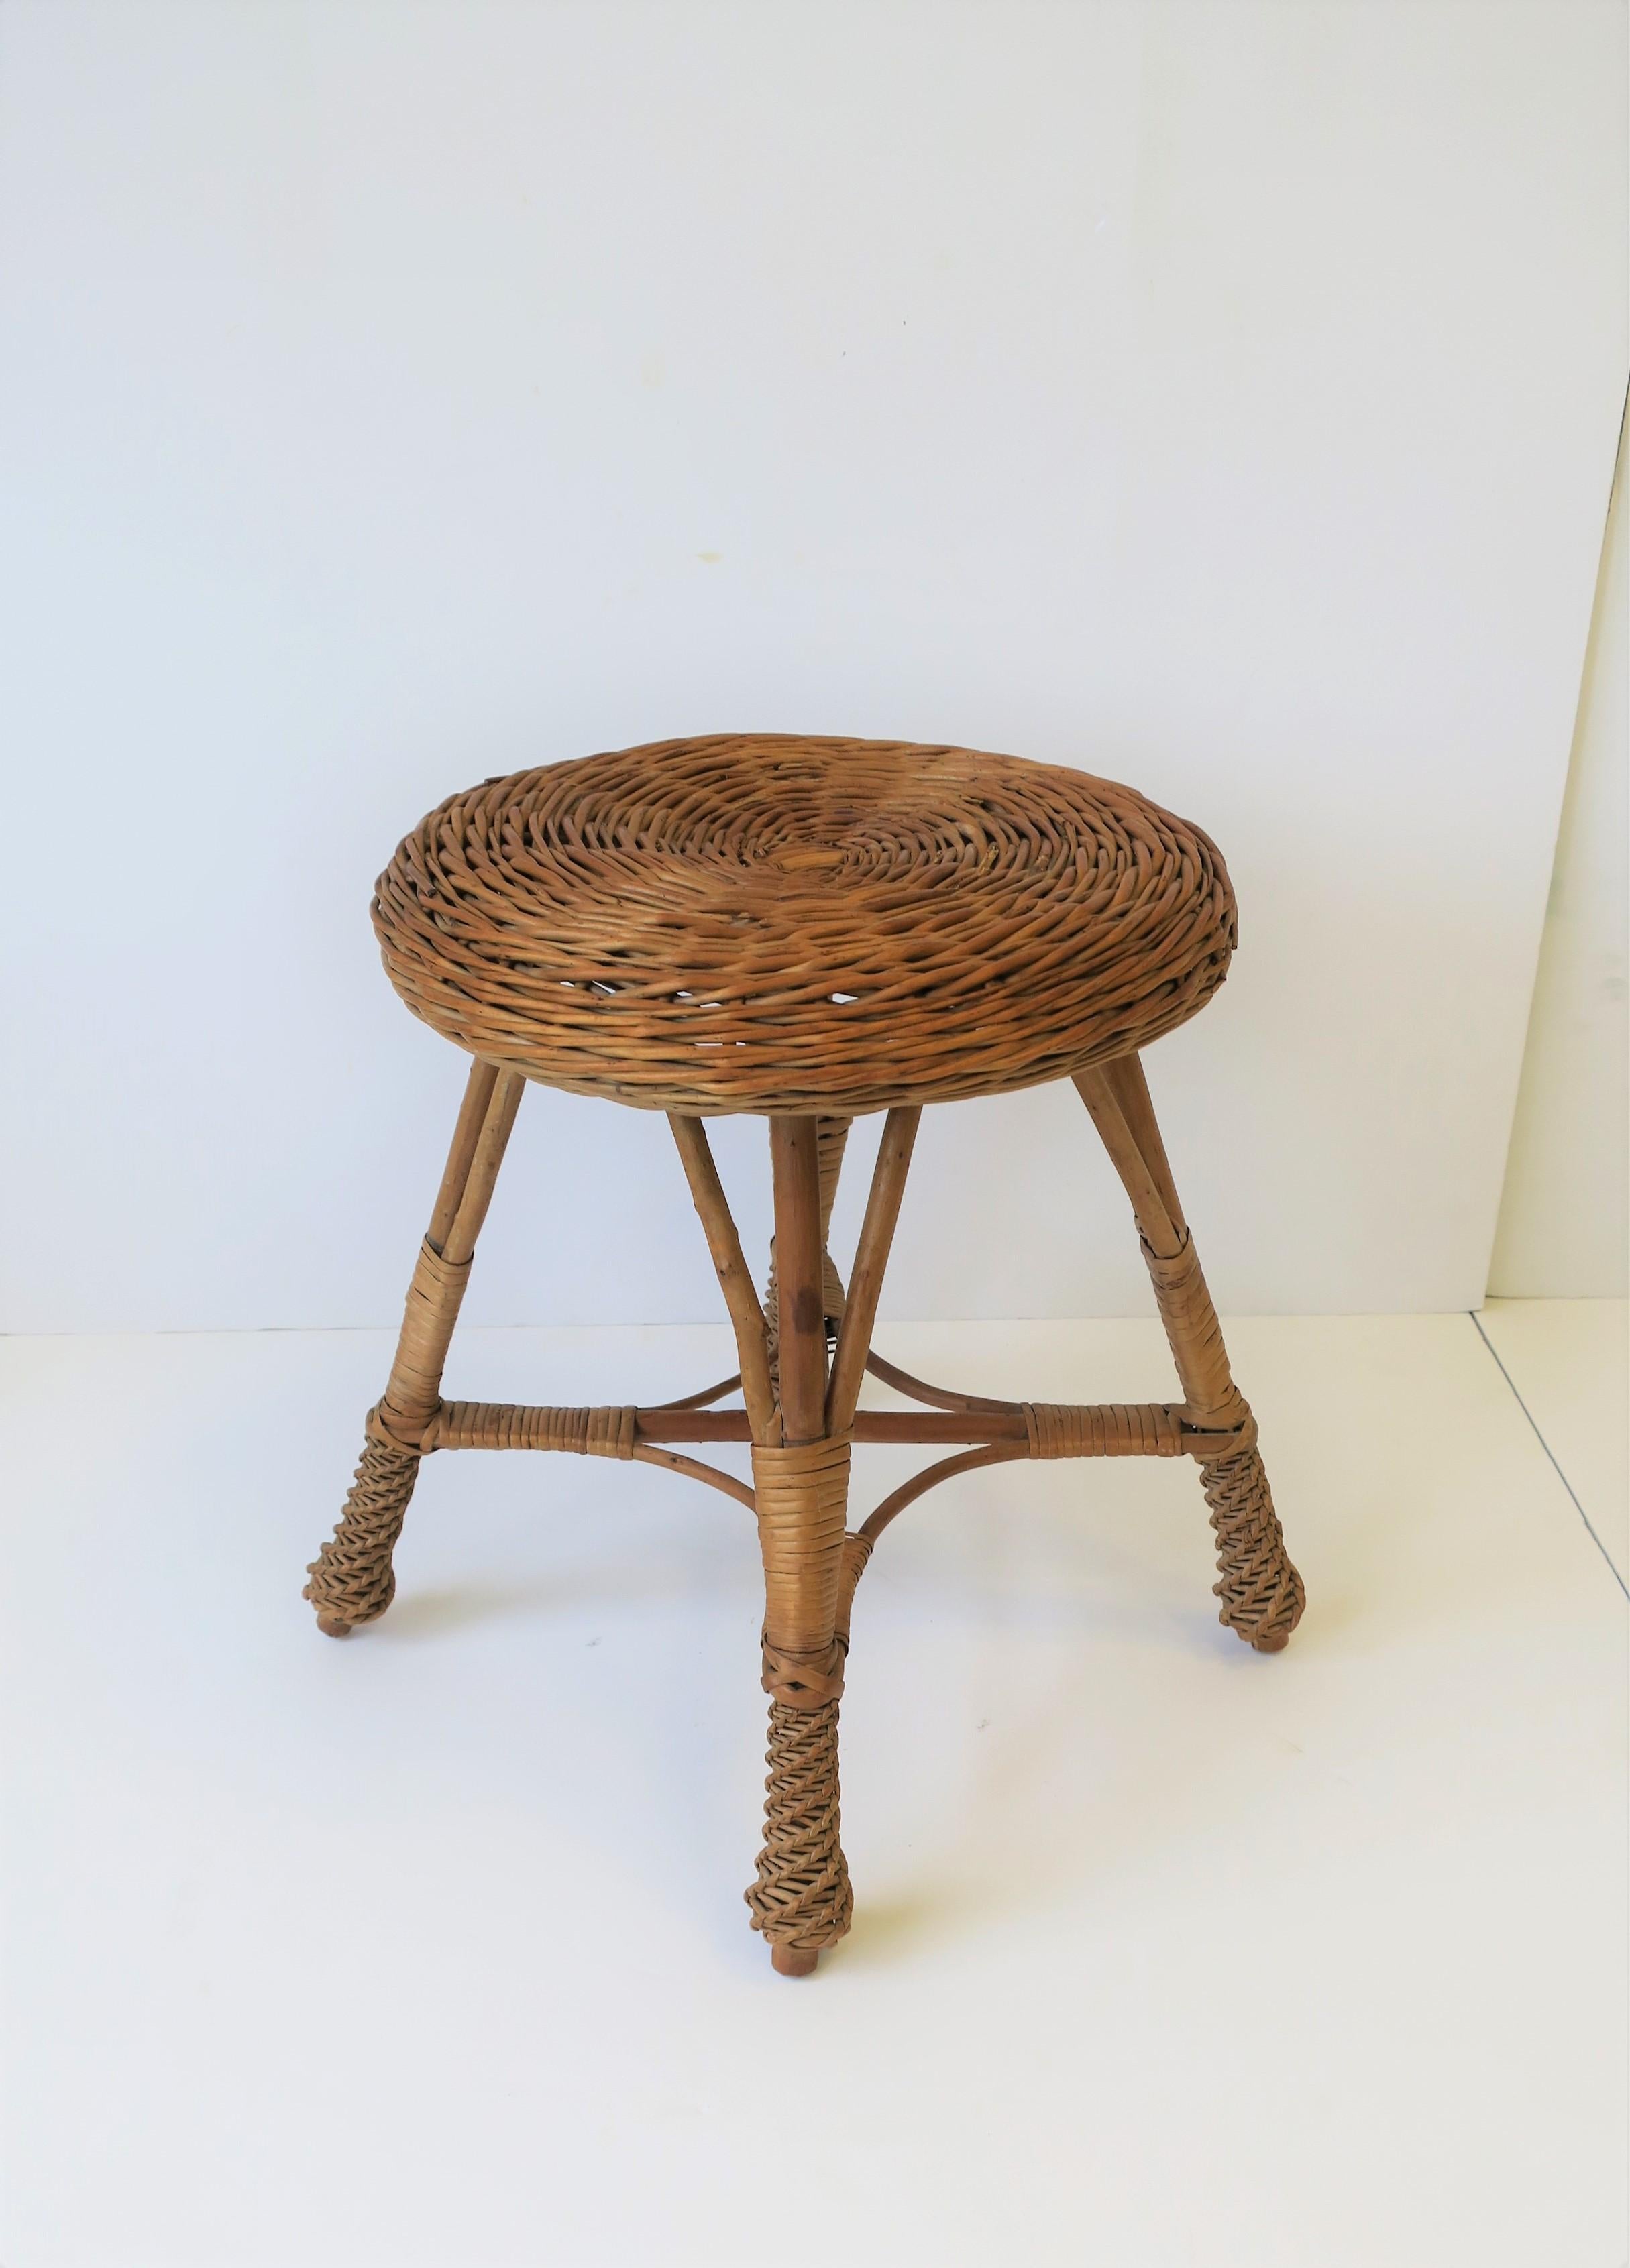 Midcentury Wicker Rattan and Wood Stool or Side Table 1